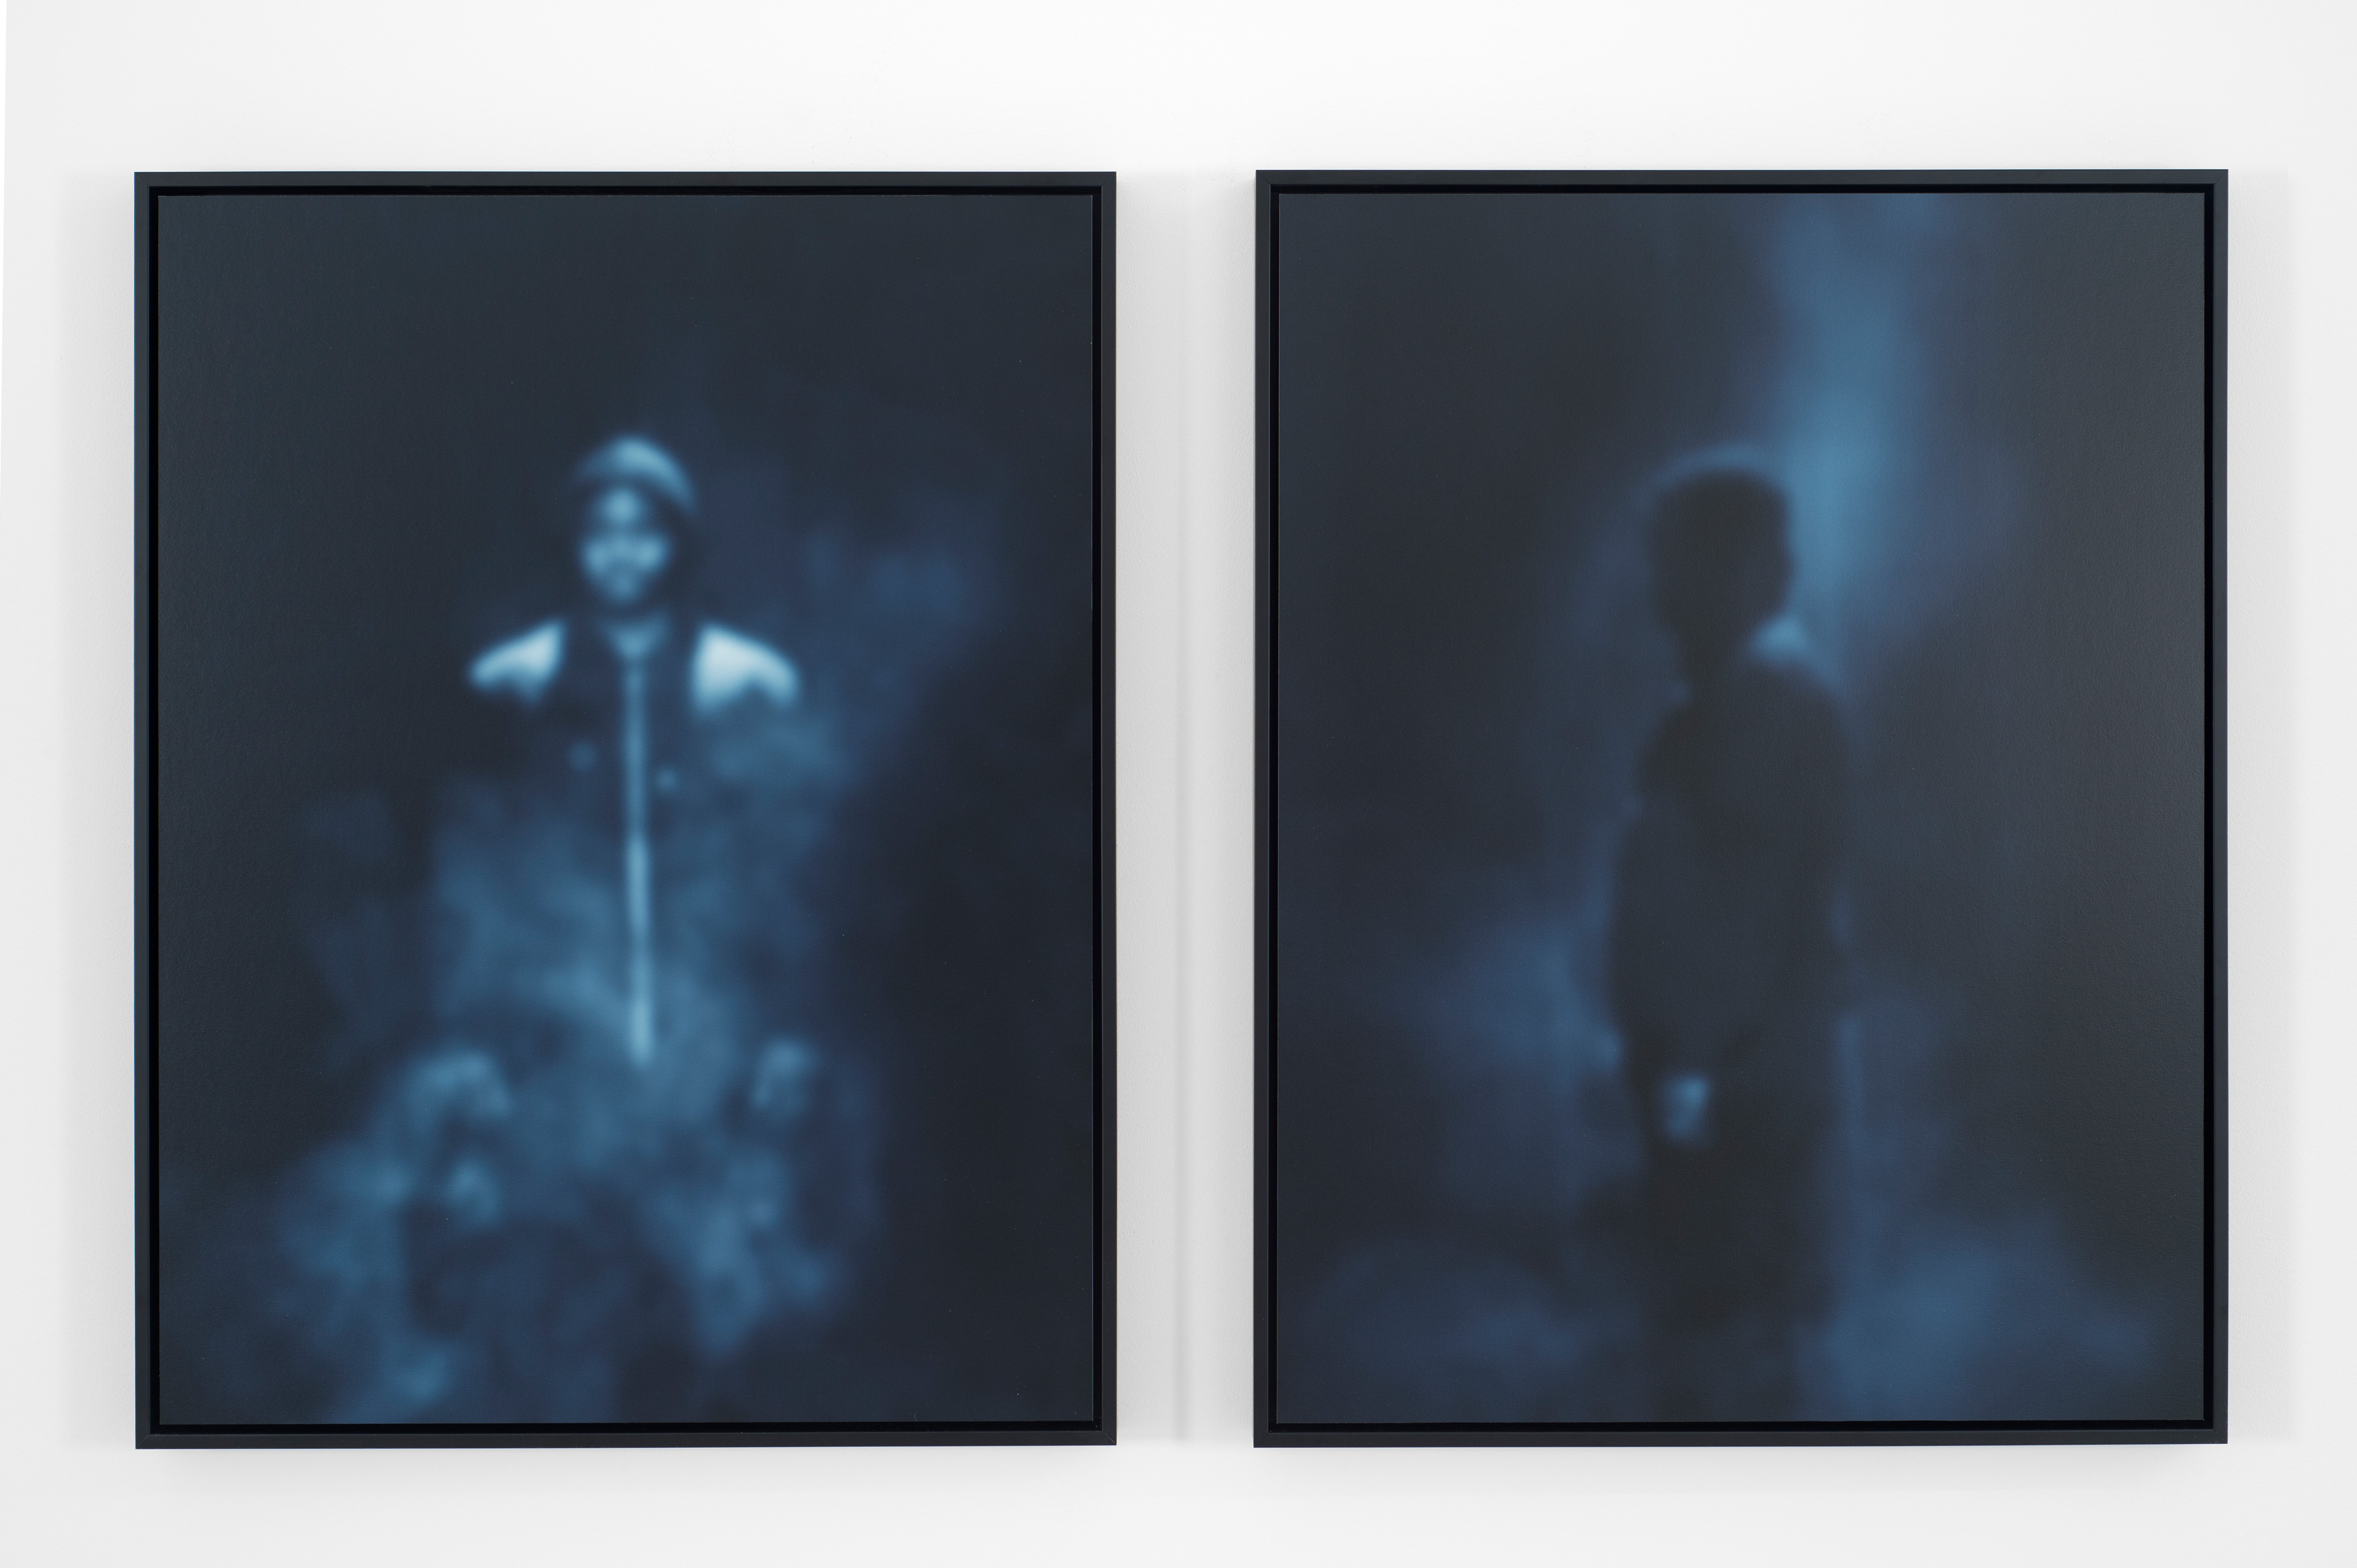 Galerie Barbara Thumm \ Carrie Mae Weems: All the Boys (Profile 1) (CMW-16-0001) \ All the Boys (Profile 1) (2016)